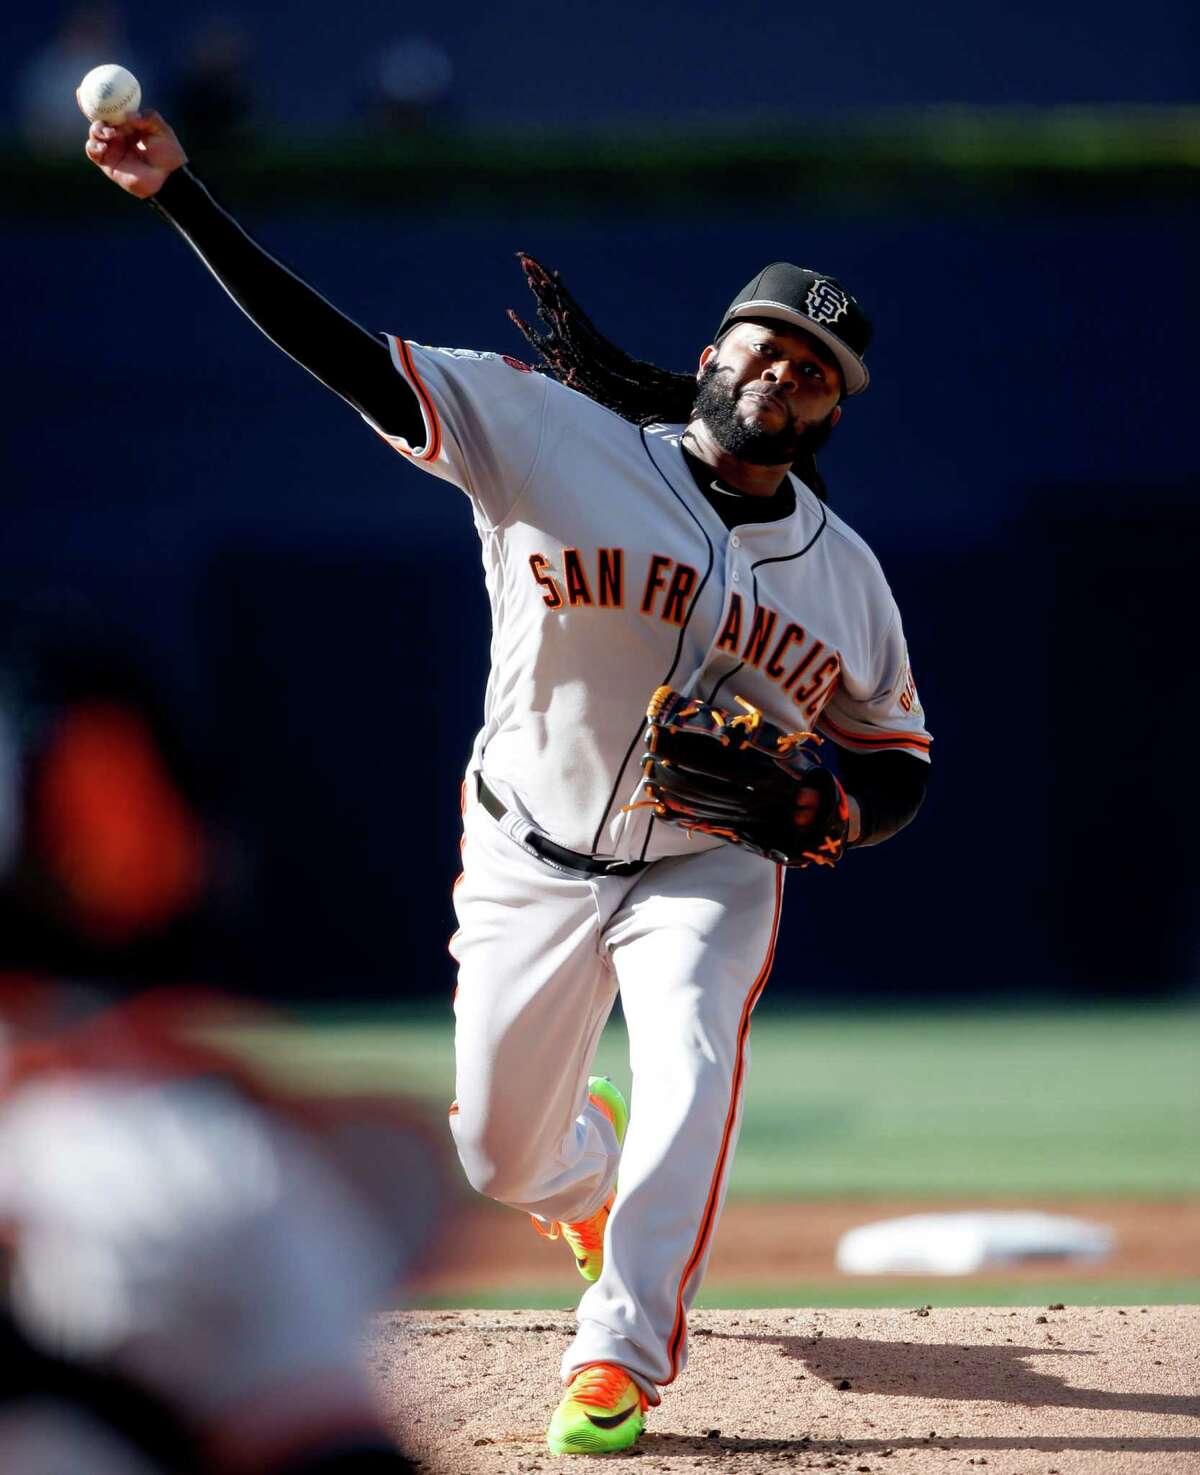 National League's starting pitcher Johnny Cueto, of the San Francisco Giants, throws during the first inning of the MLB baseball All-Star Game, Tuesday, July 12, 2016, in San Diego. (Todd Warshsaw/Pool Photo via AP)